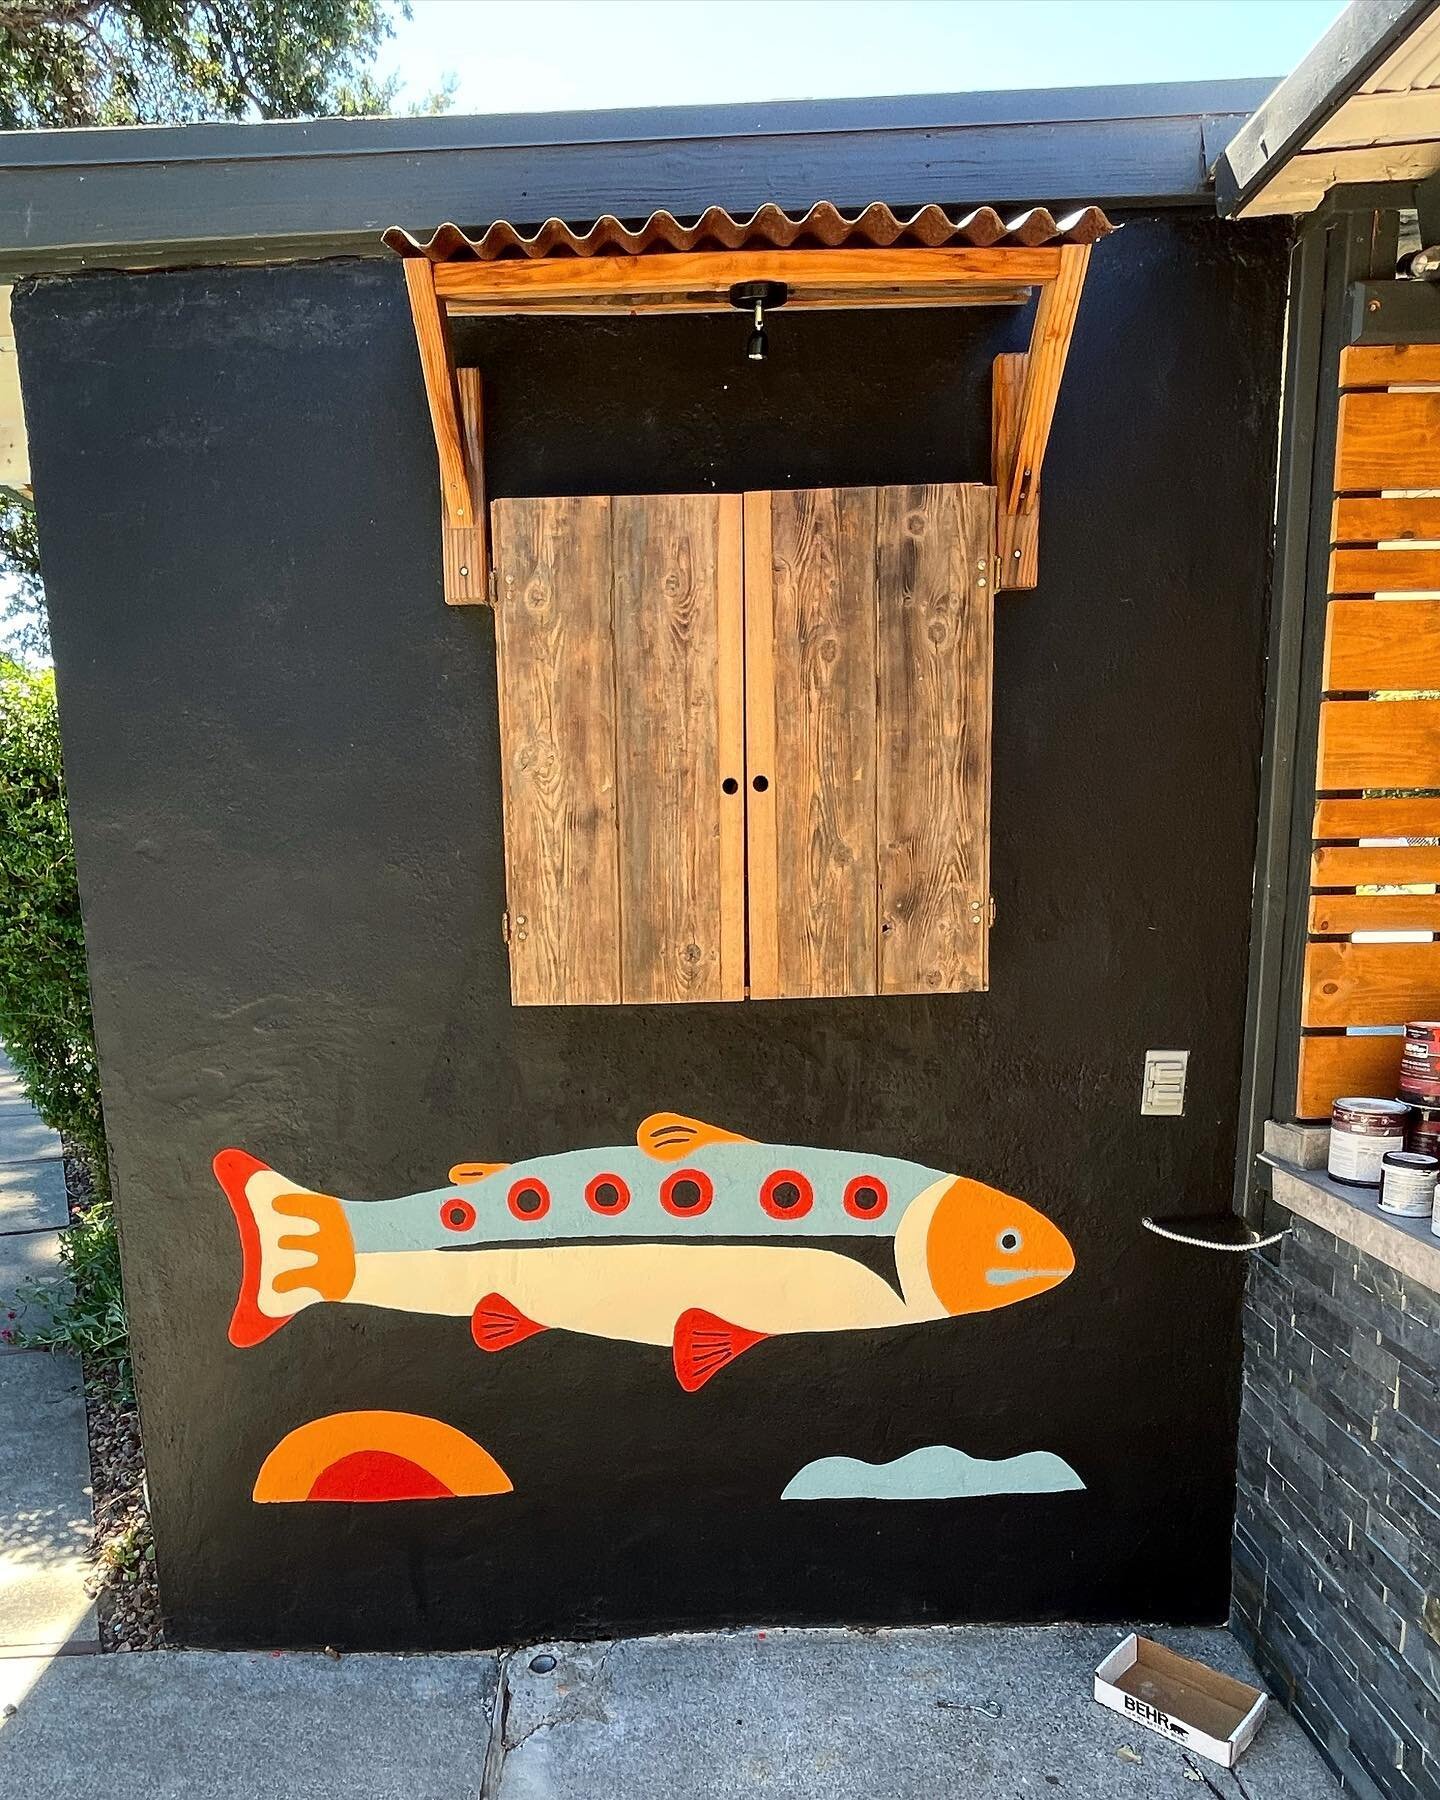 Two of the things I&rsquo;ll miss most about Chico, trout fishing and the spring wildflowers. 
.
Some fresh paint for my friend&rsquo;s bnb in Chico, little accents to bring the color out into the yard a bit more. Super fun as always 🙏🏼🙏🏼🙏🏼
.
@